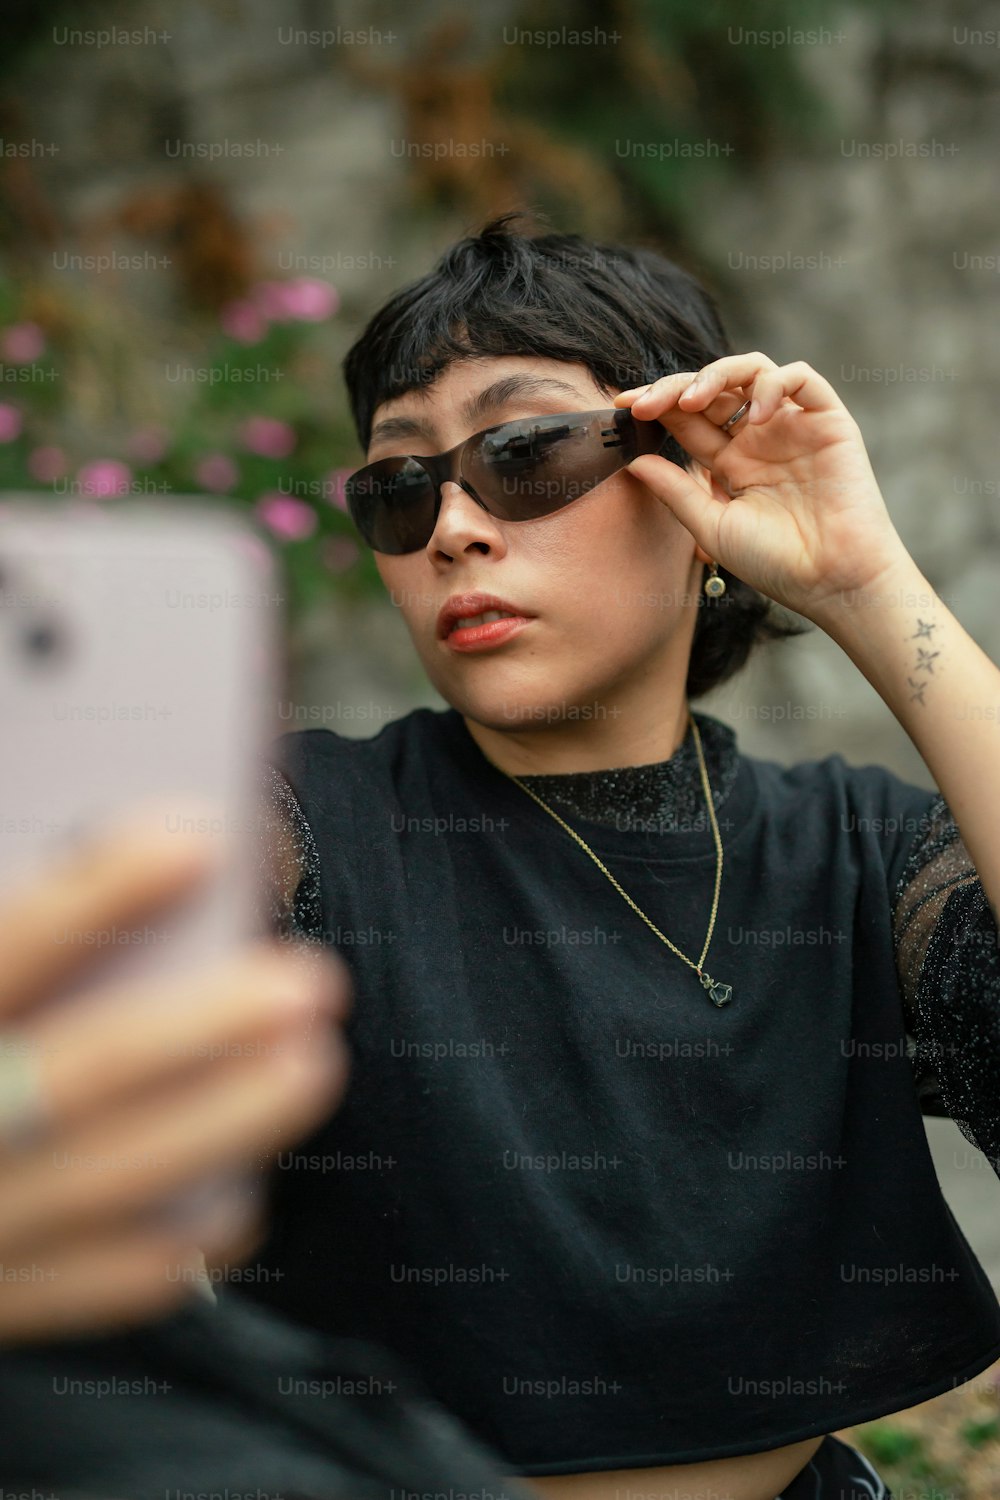 a woman wearing sunglasses looking at a cell phone